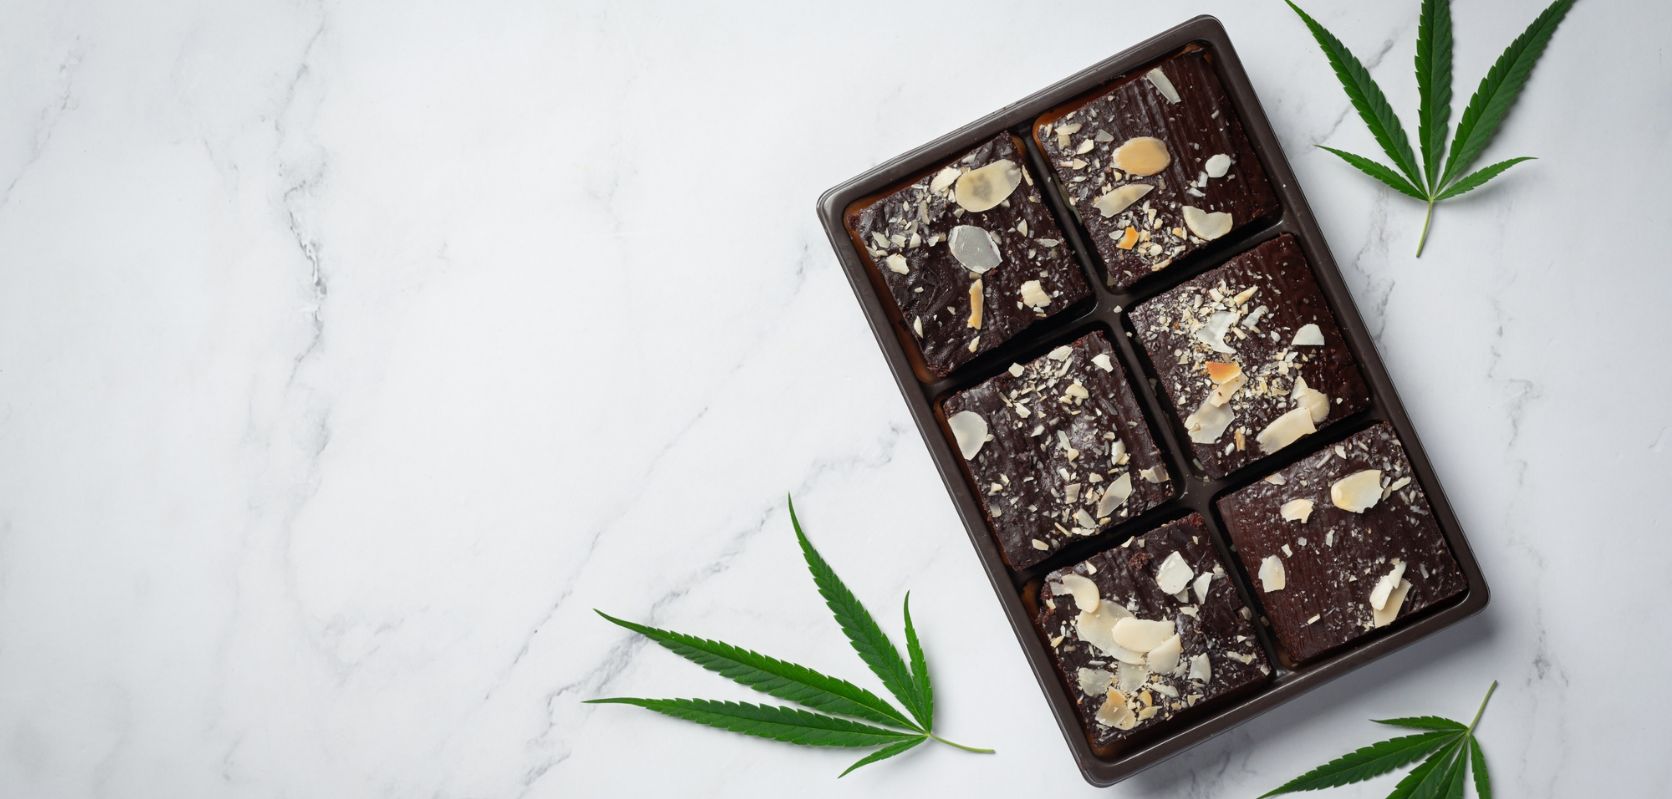 Cannabis chocolate is an edible that combines chocolate and cannabis concentrate. The concentrate may be in form of cannabis oil or cannabis butter.